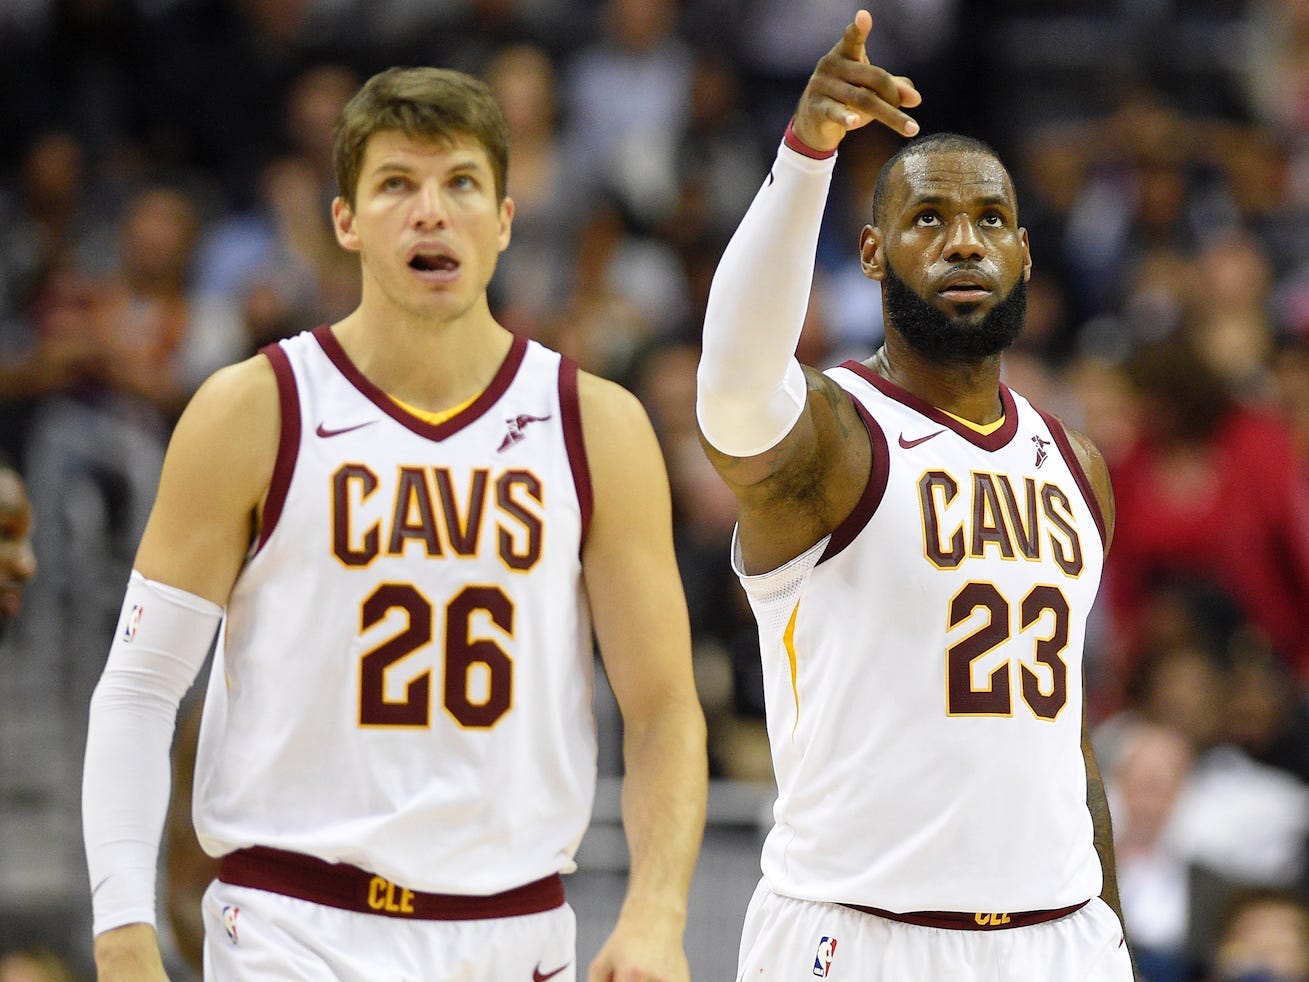 Kyle Korver looks up while standing next to a pointing LeBron James.